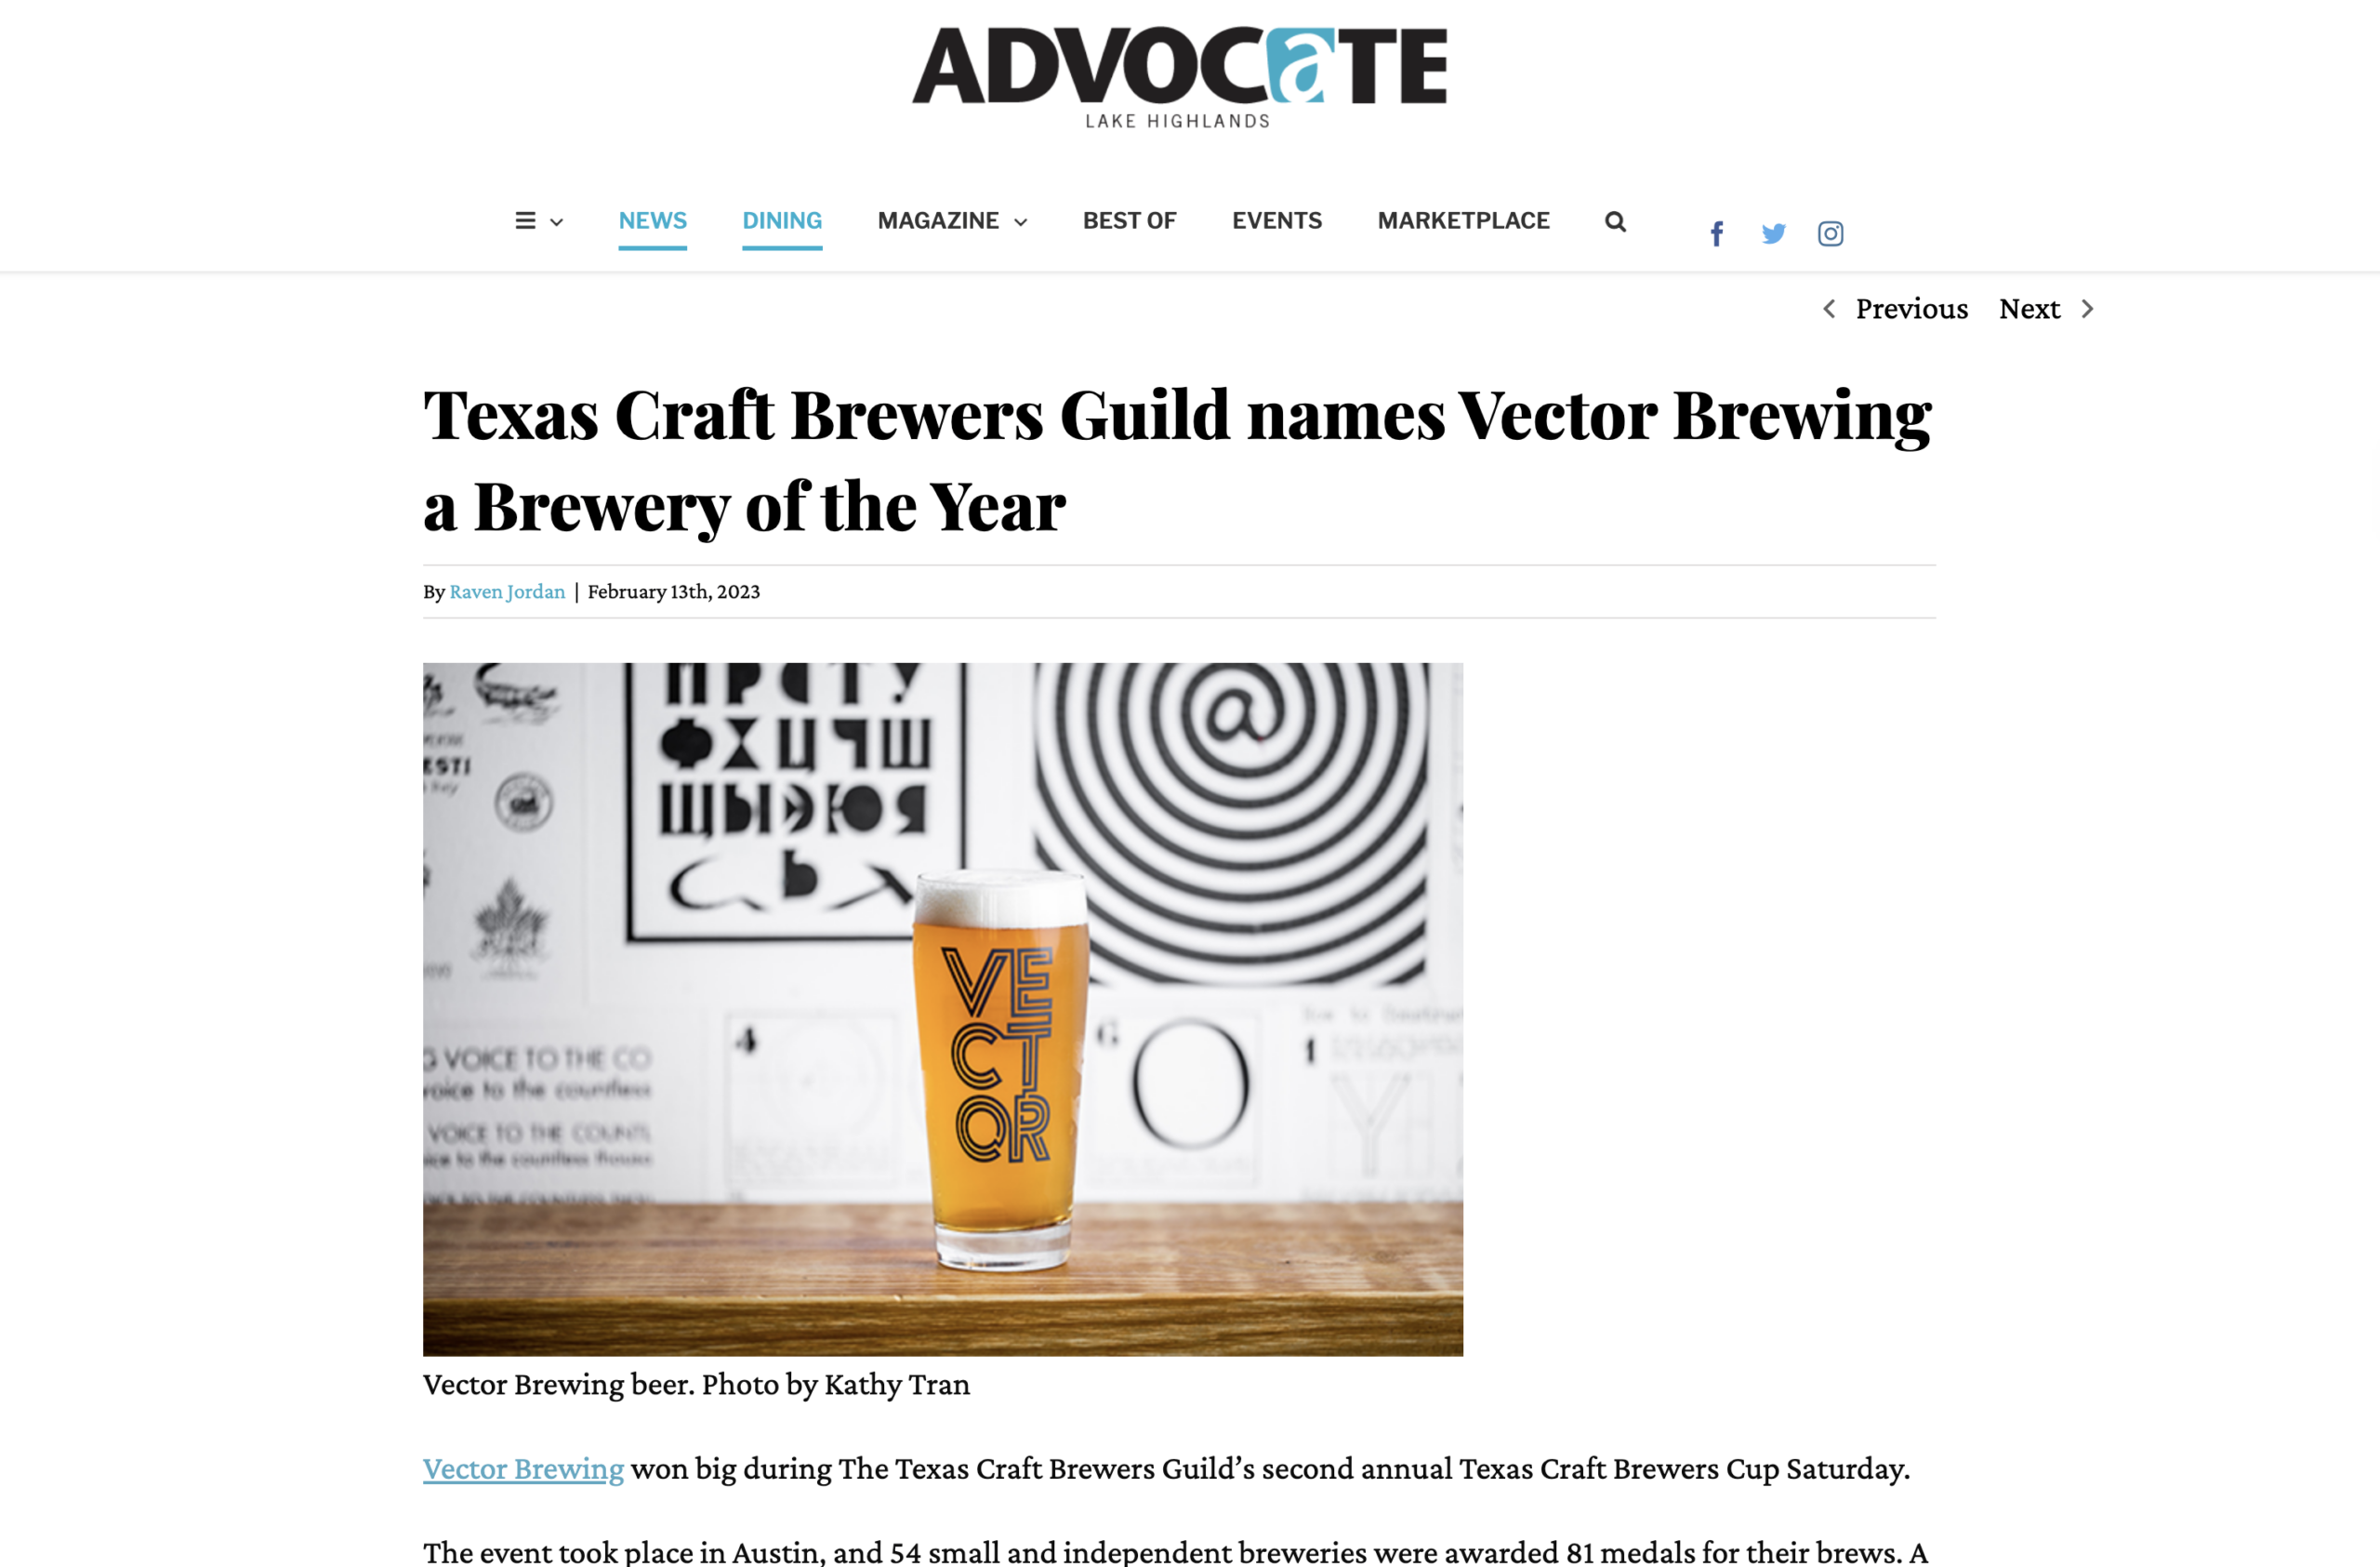 Texas Craft Brewers Guild names Vector Brewing a Brewery of the Year [Lake Highlands Advocate]